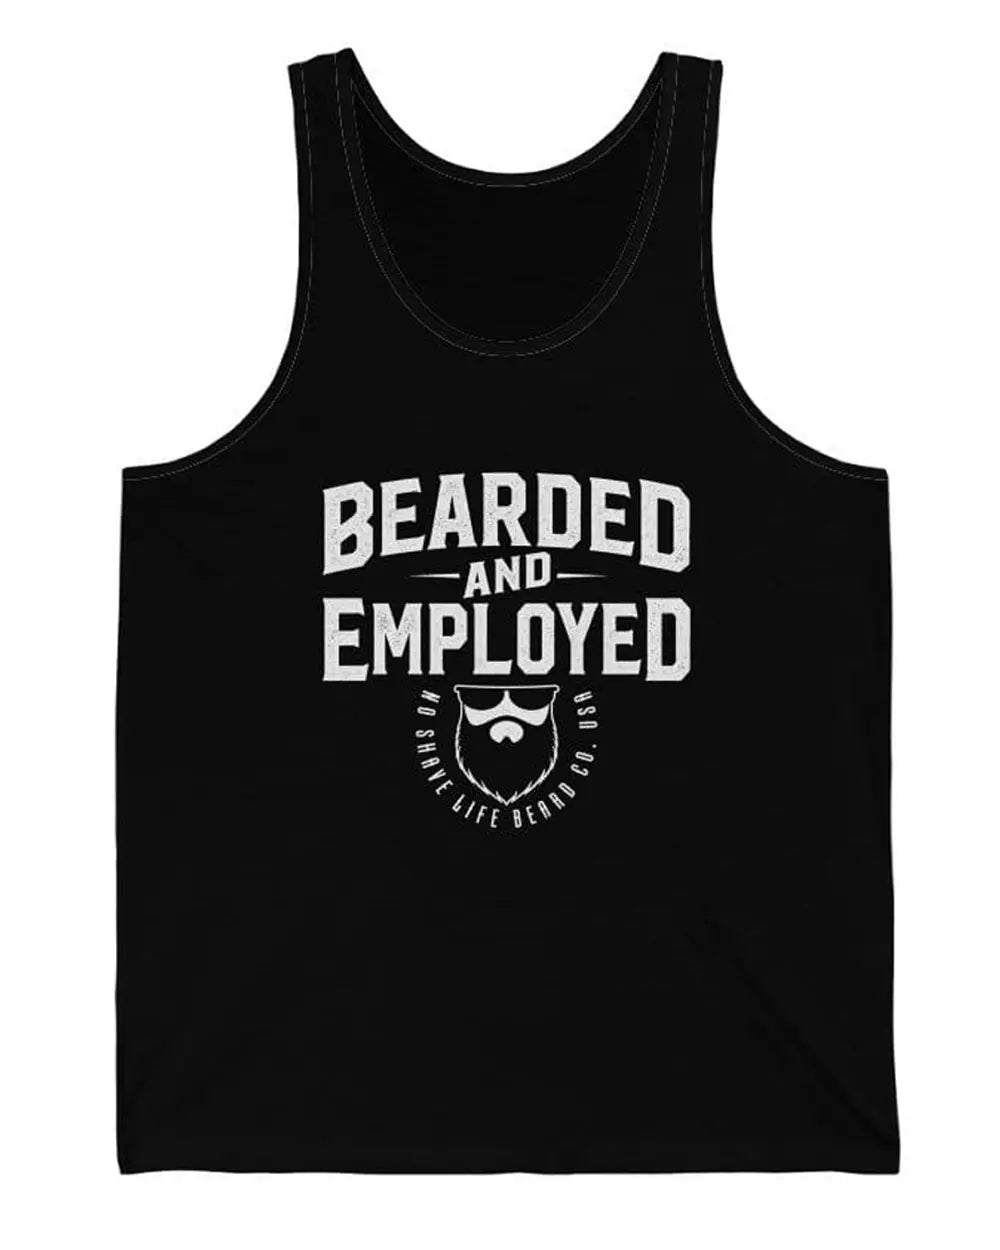 Bearded and Employed Black Men's Tank Top